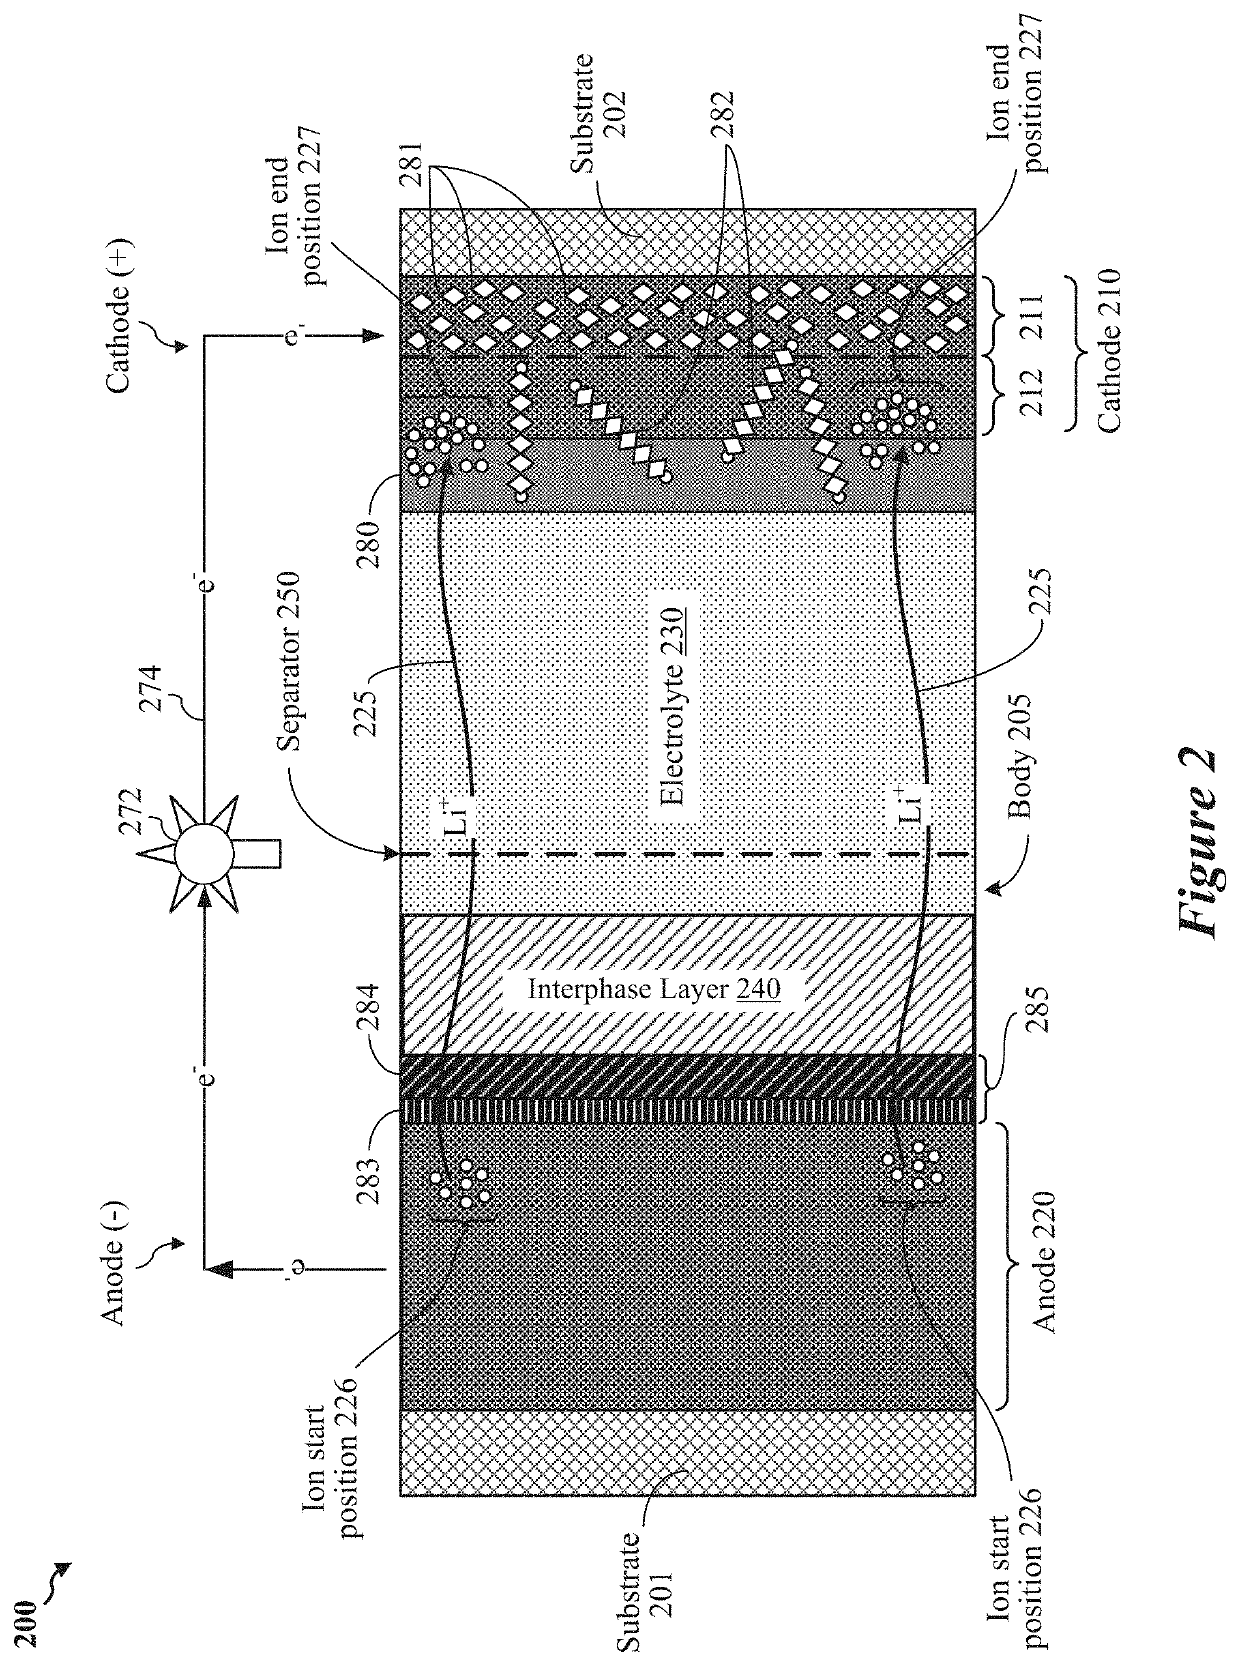 Protective layer including tin fluoride disposed on a lithium anode in a lithium-sulfur battery